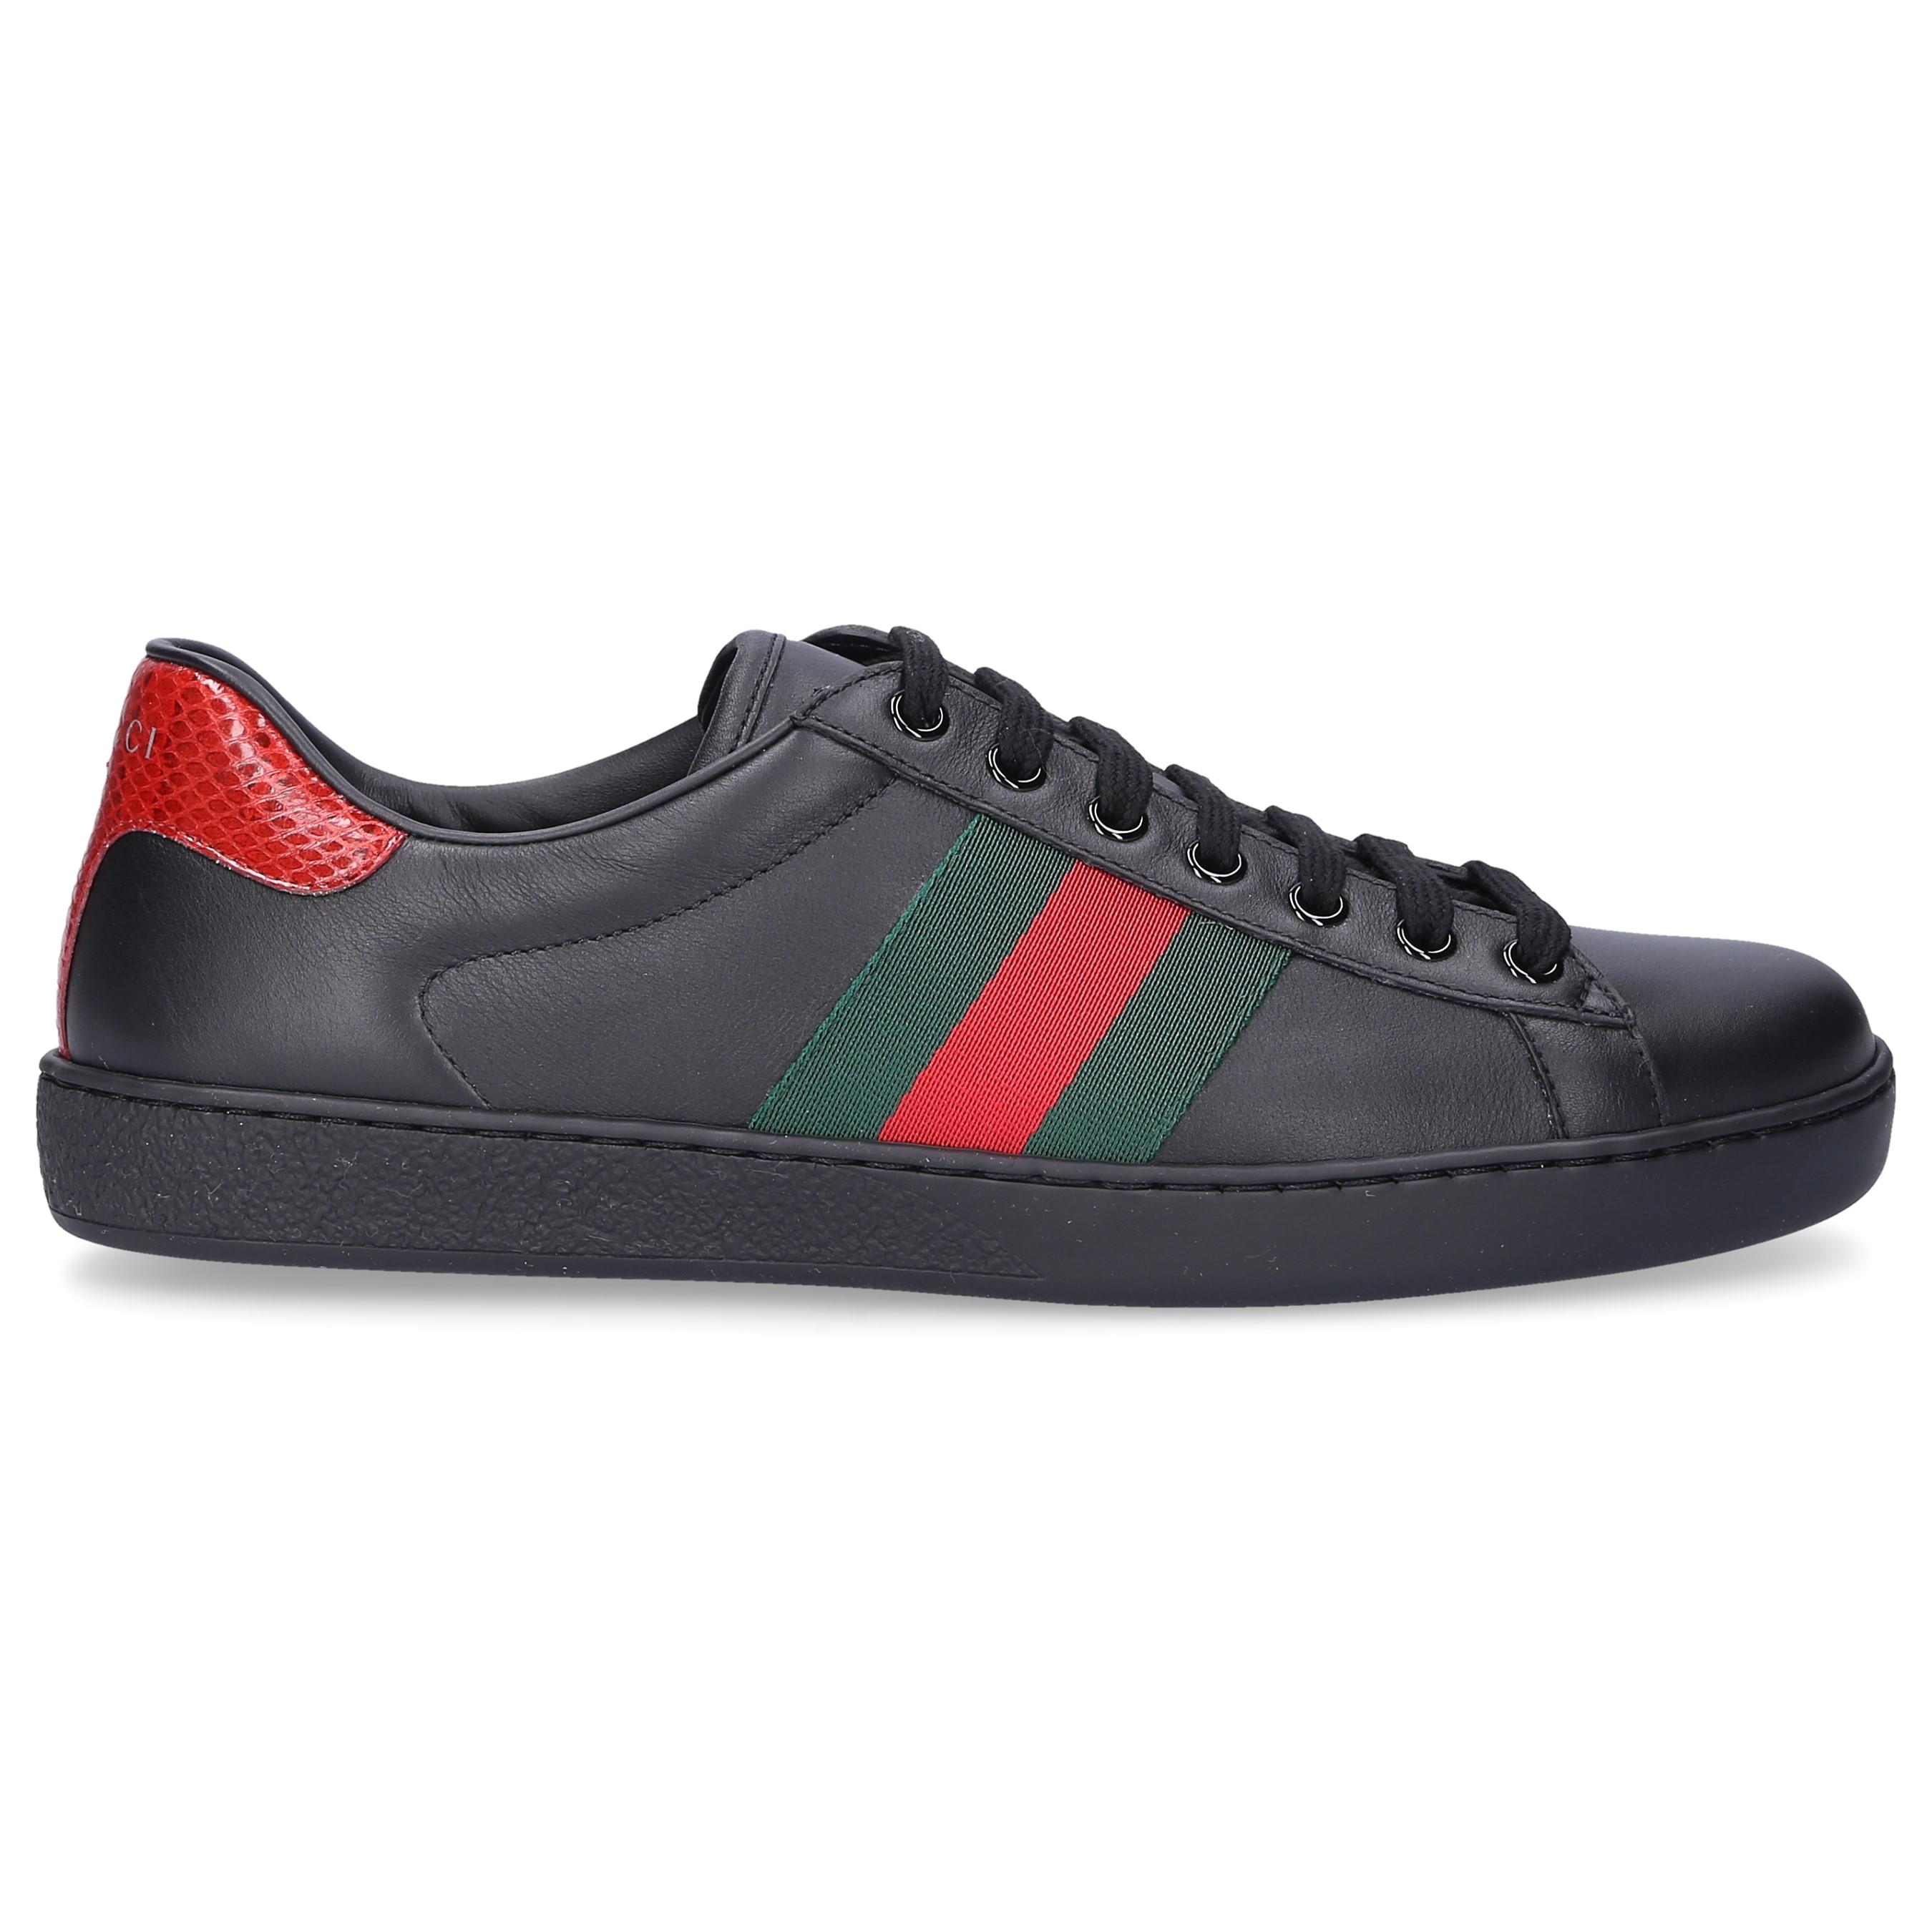 Lyst - Gucci Leather Sneakers Ace Sneaker in Black for Men